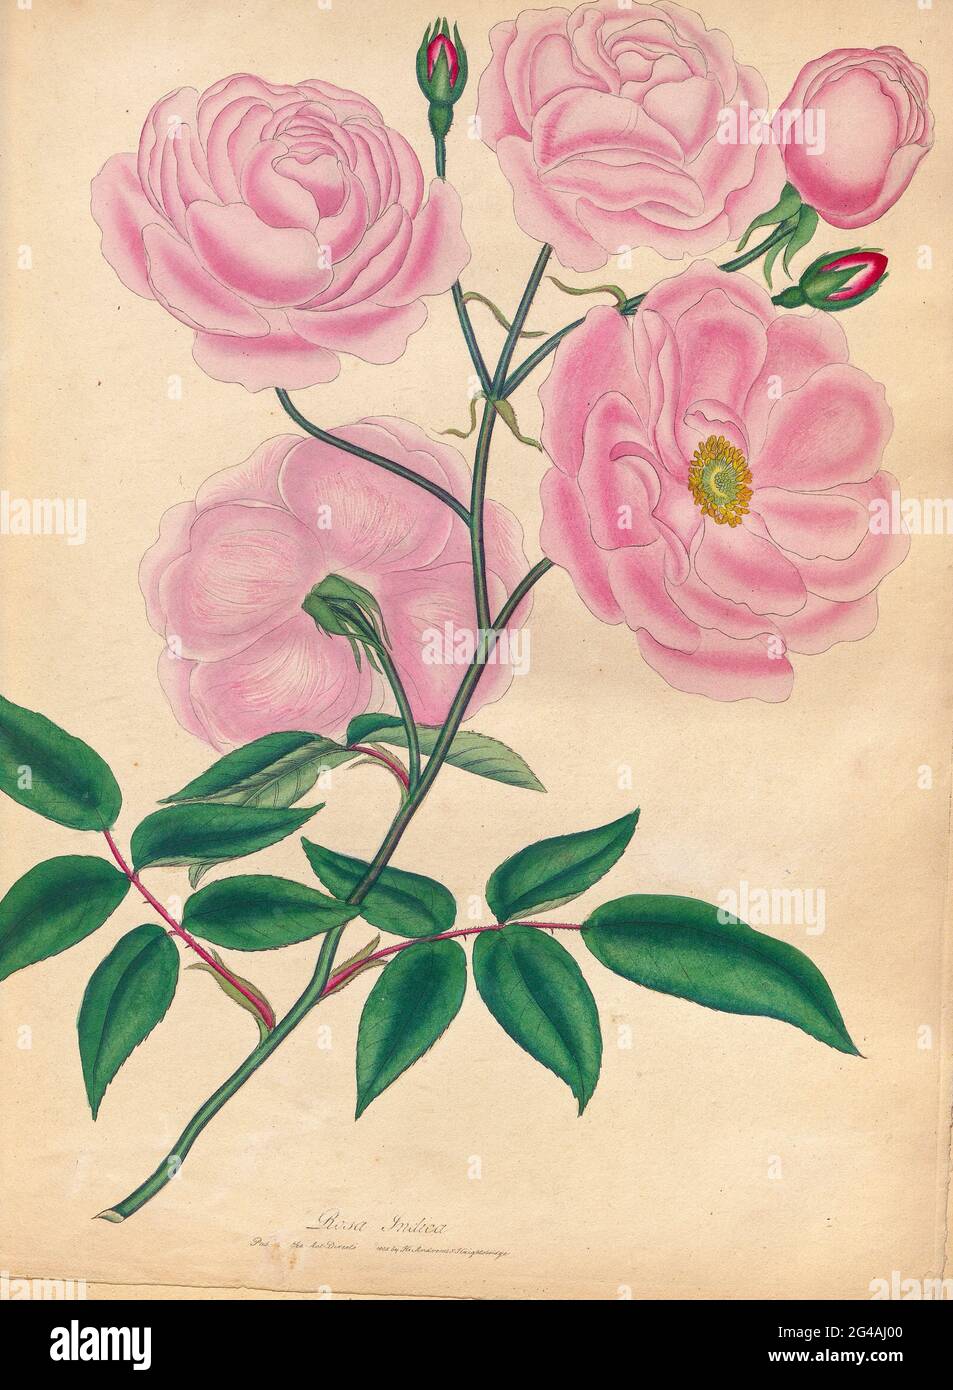 ROSA indica, Indian Rose From the book Roses, or, A monograph of the genus Rosa : containing coloured figures of all the known species and beautiful varieties, drawn, engraved, described, and coloured, from living plants. by Andrews, Henry Charles, Published in London : printed by R. Taylor and Co. ; 1805. Stock Photo